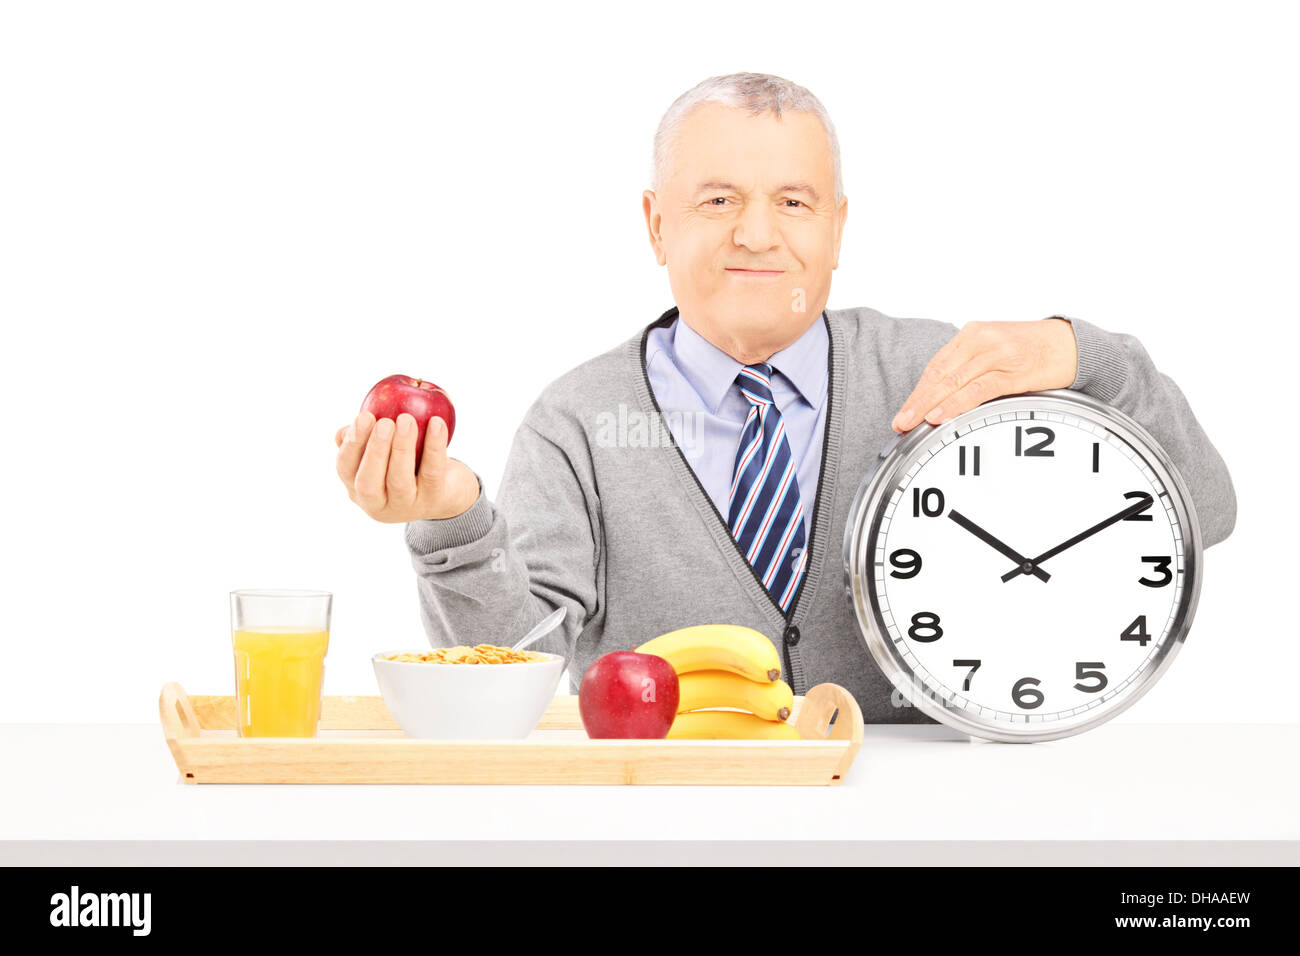 Senior gentleman holding a clock and red apple, on a table with a tray full of drink and food Stock Photo